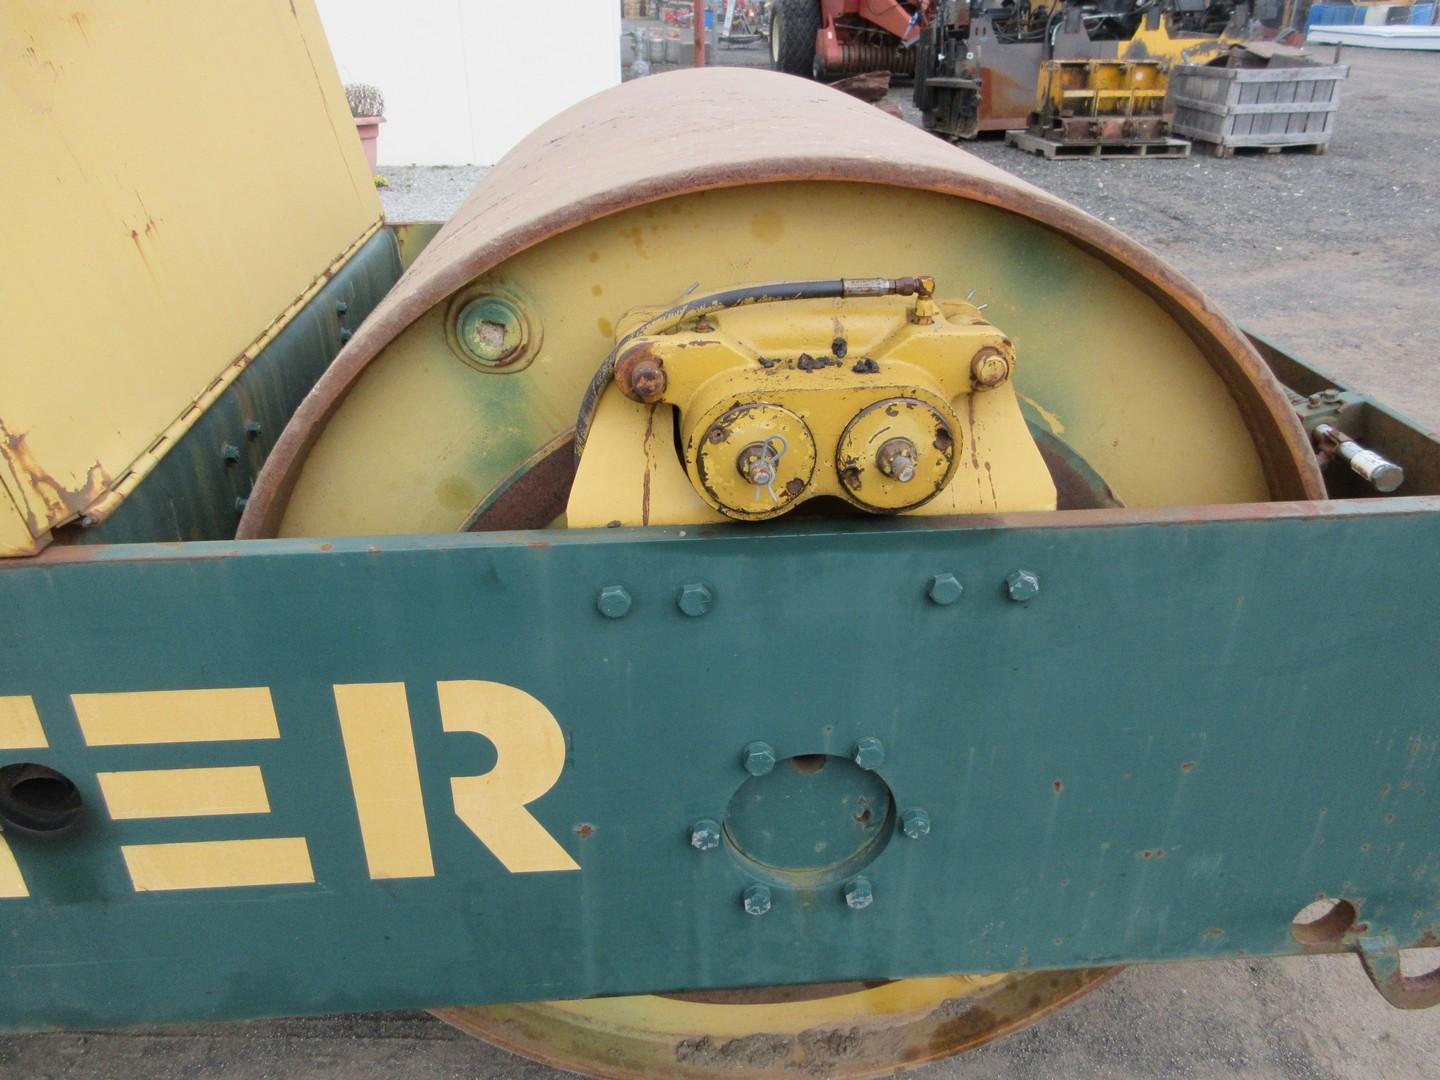 Hyster C340B Double Drum Roller